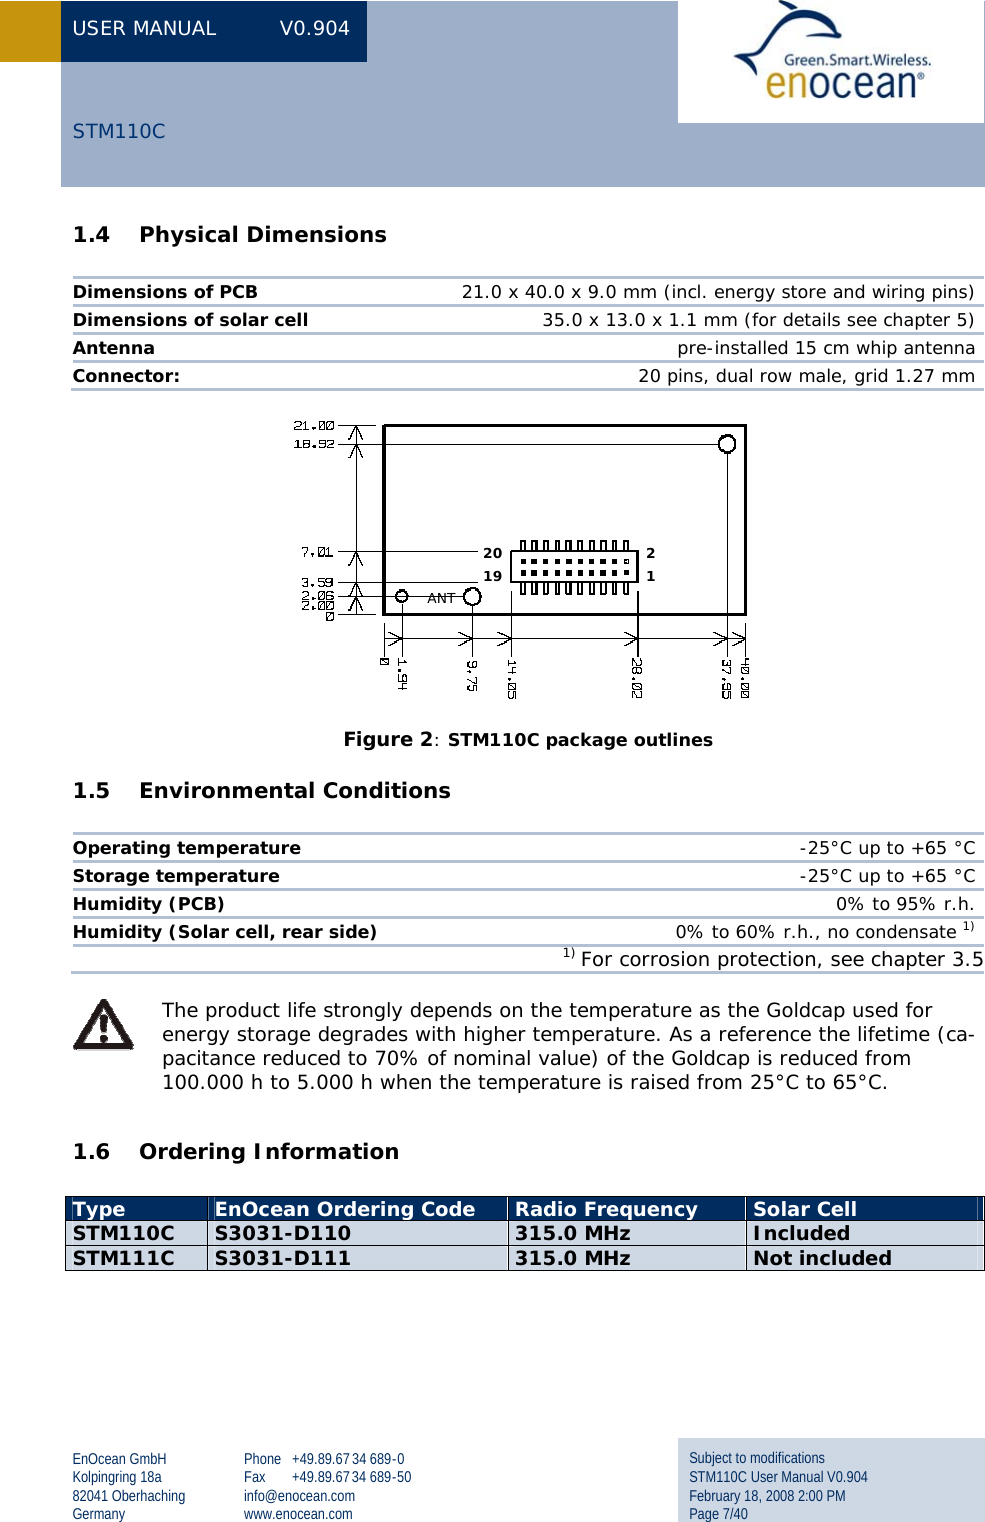 USER MANUAL  V0.904 EnOcean GmbH Kolpingring 18a 82041 Oberhaching Germany Phone +49.89.67 34 689-0 Fax +49.89.67 34 689-50 info@enocean.com www.enocean.com Subject to modifications STM110C User Manual V0.904 February 18, 2008 2:00 PM Page 7/40  STM110C 1.4 Physical Dimensions  Dimensions of PCB  21.0 x 40.0 x 9.0 mm (incl. energy store and wiring pins) Dimensions of solar cell  35.0 x 13.0 x 1.1 mm (for details see chapter 5) Antenna  pre-installed 15 cm whip antenna Connector:   20 pins, dual row male, grid 1.27 mm  Figure 2: STM110C package outlines 1.5 Environmental Conditions  Operating temperature  -25°C up to +65 °C Storage temperature  -25°C up to +65 °C Humidity (PCB) 0% to 95% r.h. Humidity (Solar cell, rear side)  0% to 60% r.h., no condensate 1) 1) For corrosion protection, see chapter 3.5  The product life strongly depends on the temperature as the Goldcap used for energy storage degrades with higher temperature. As a reference the lifetime (ca-pacitance reduced to 70% of nominal value) of the Goldcap is reduced from 100.000 h to 5.000 h when the temperature is raised from 25°C to 65°C.  1.6 Ordering Information    Type  EnOcean Ordering Code  Radio Frequency  Solar Cell STM110C  S3031-D110  315.0 MHz  Included STM111C  S3031-D111  315.0 MHz  Not included 2 1 20 19 ANT 